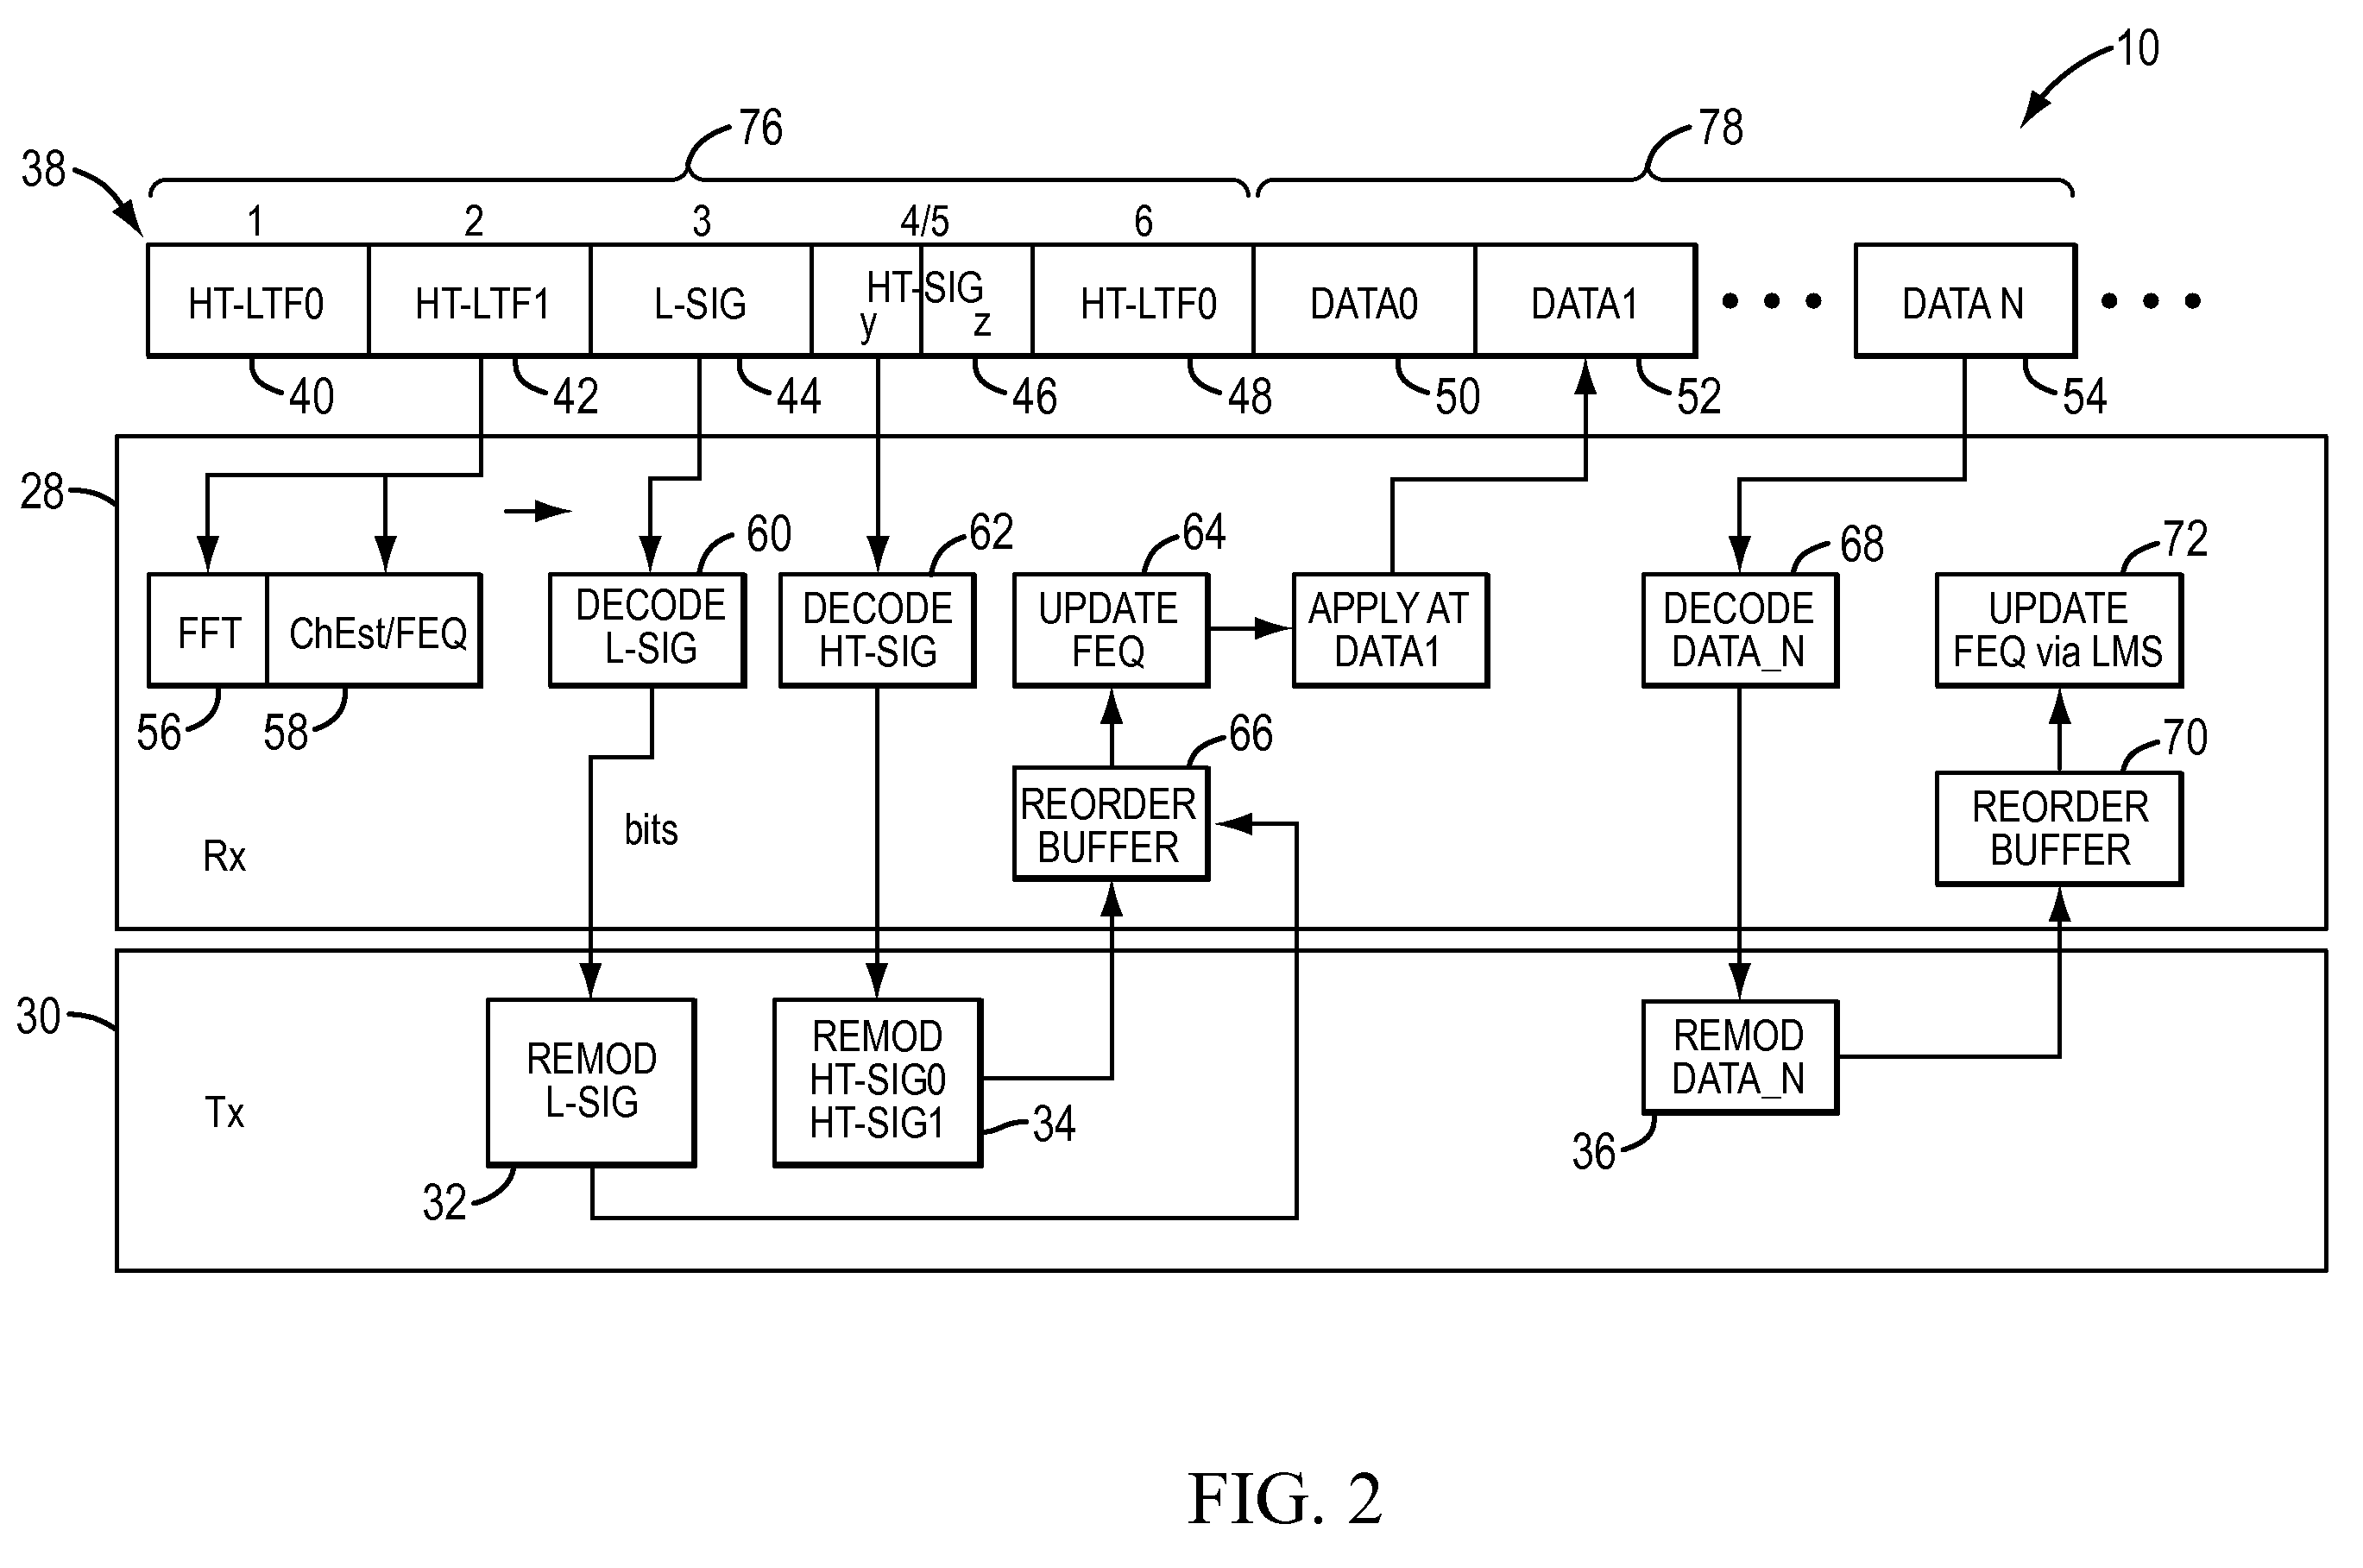 Method and apparatus for reception in a multi-input-multi-output (MIMO) orthogonal frequency domain modulation (OFDM) wireless communication system